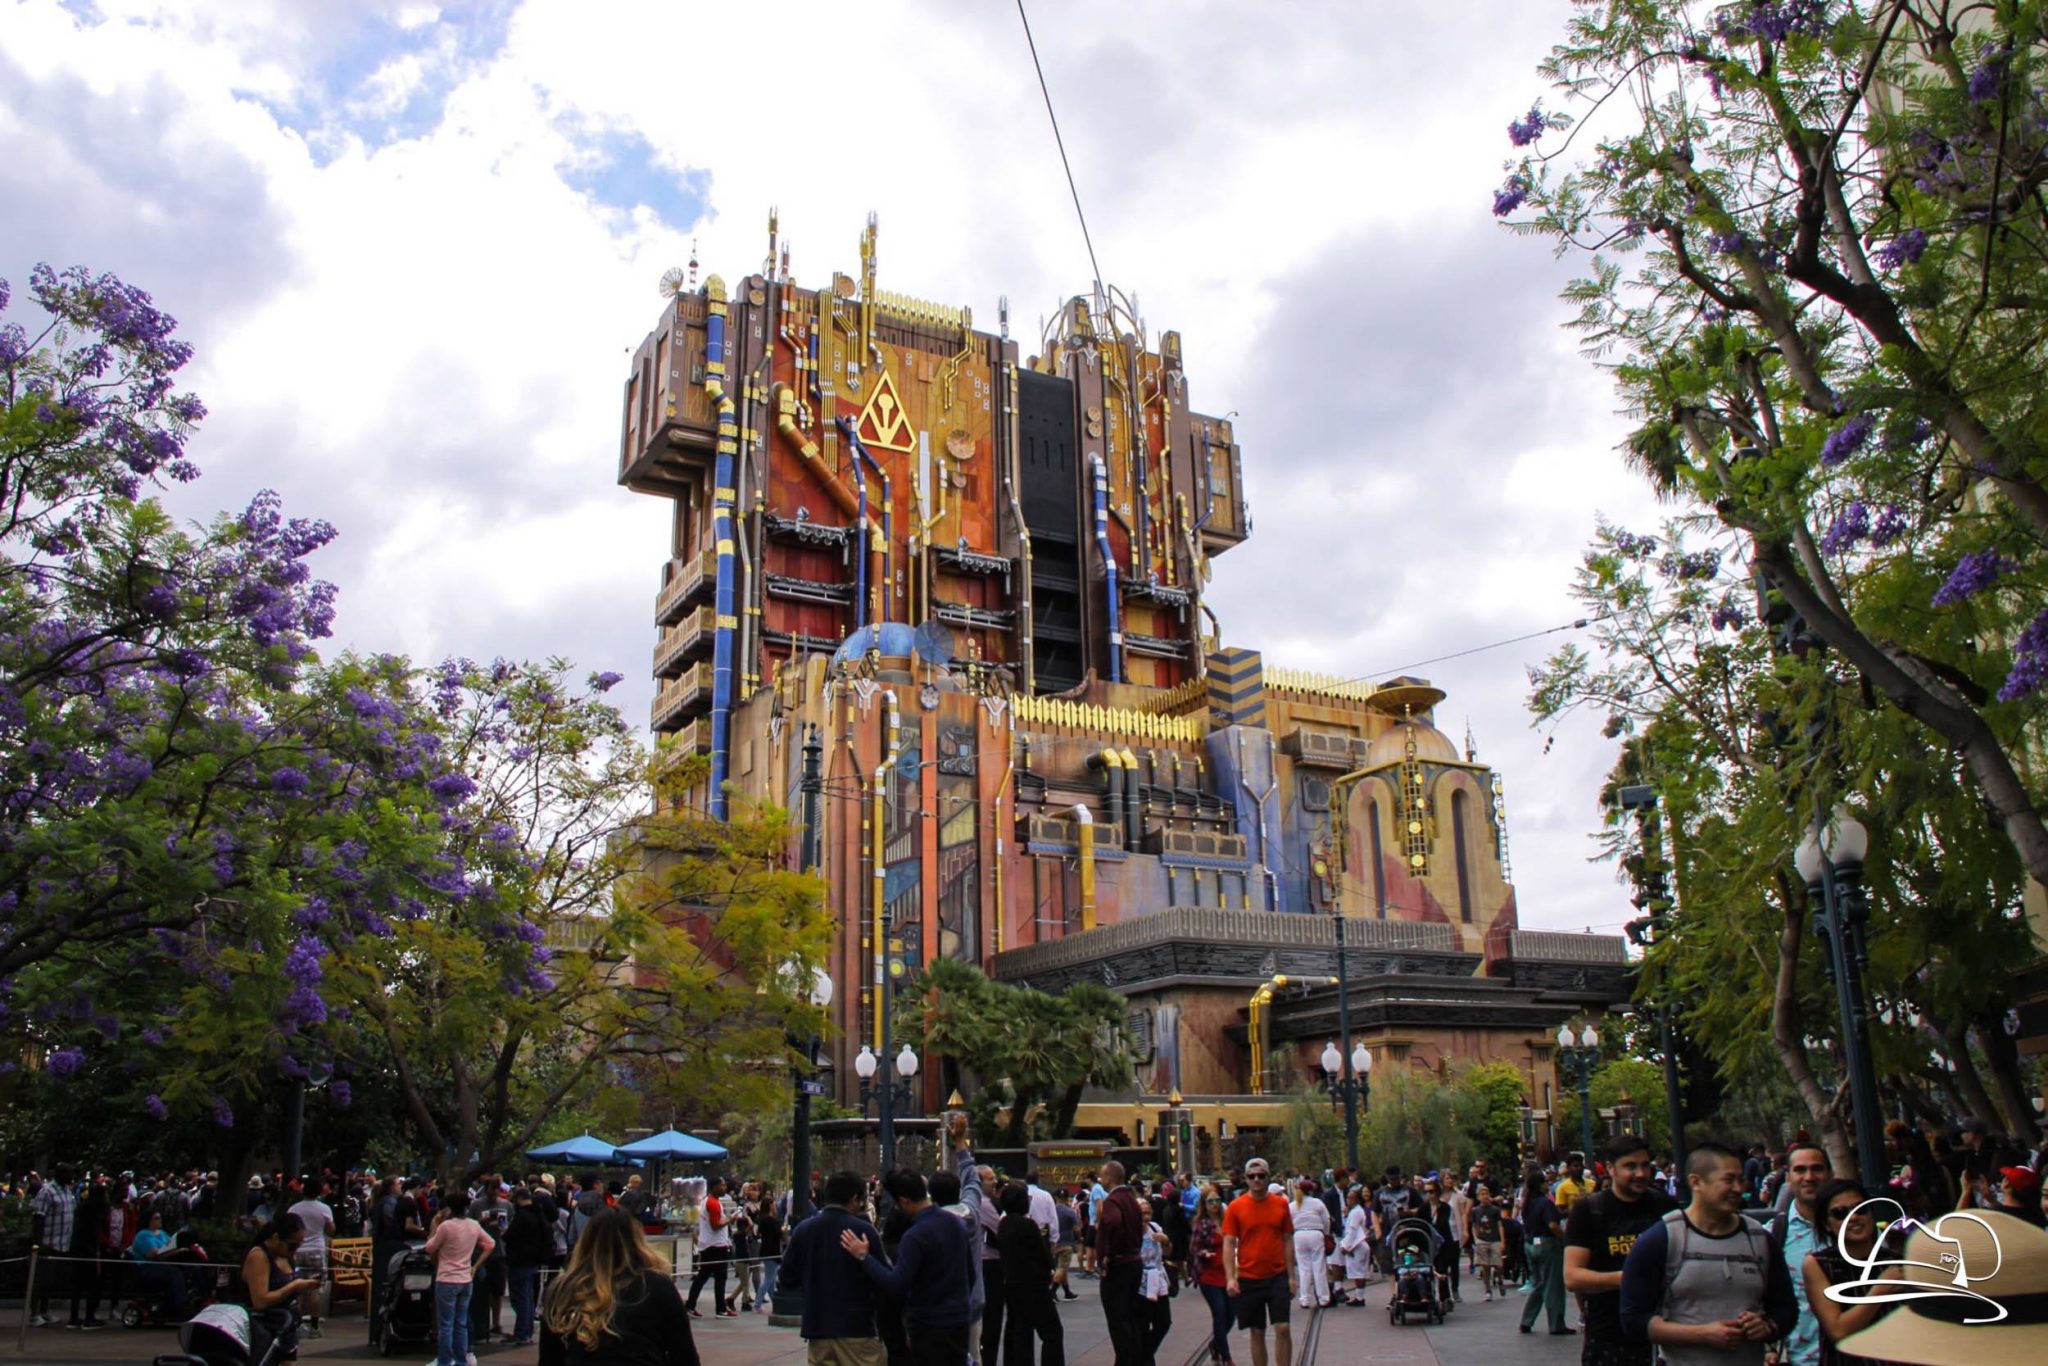 Guardians of the Galaxy: Mission BREAKOUT! Gets Twice the Extra Magic!